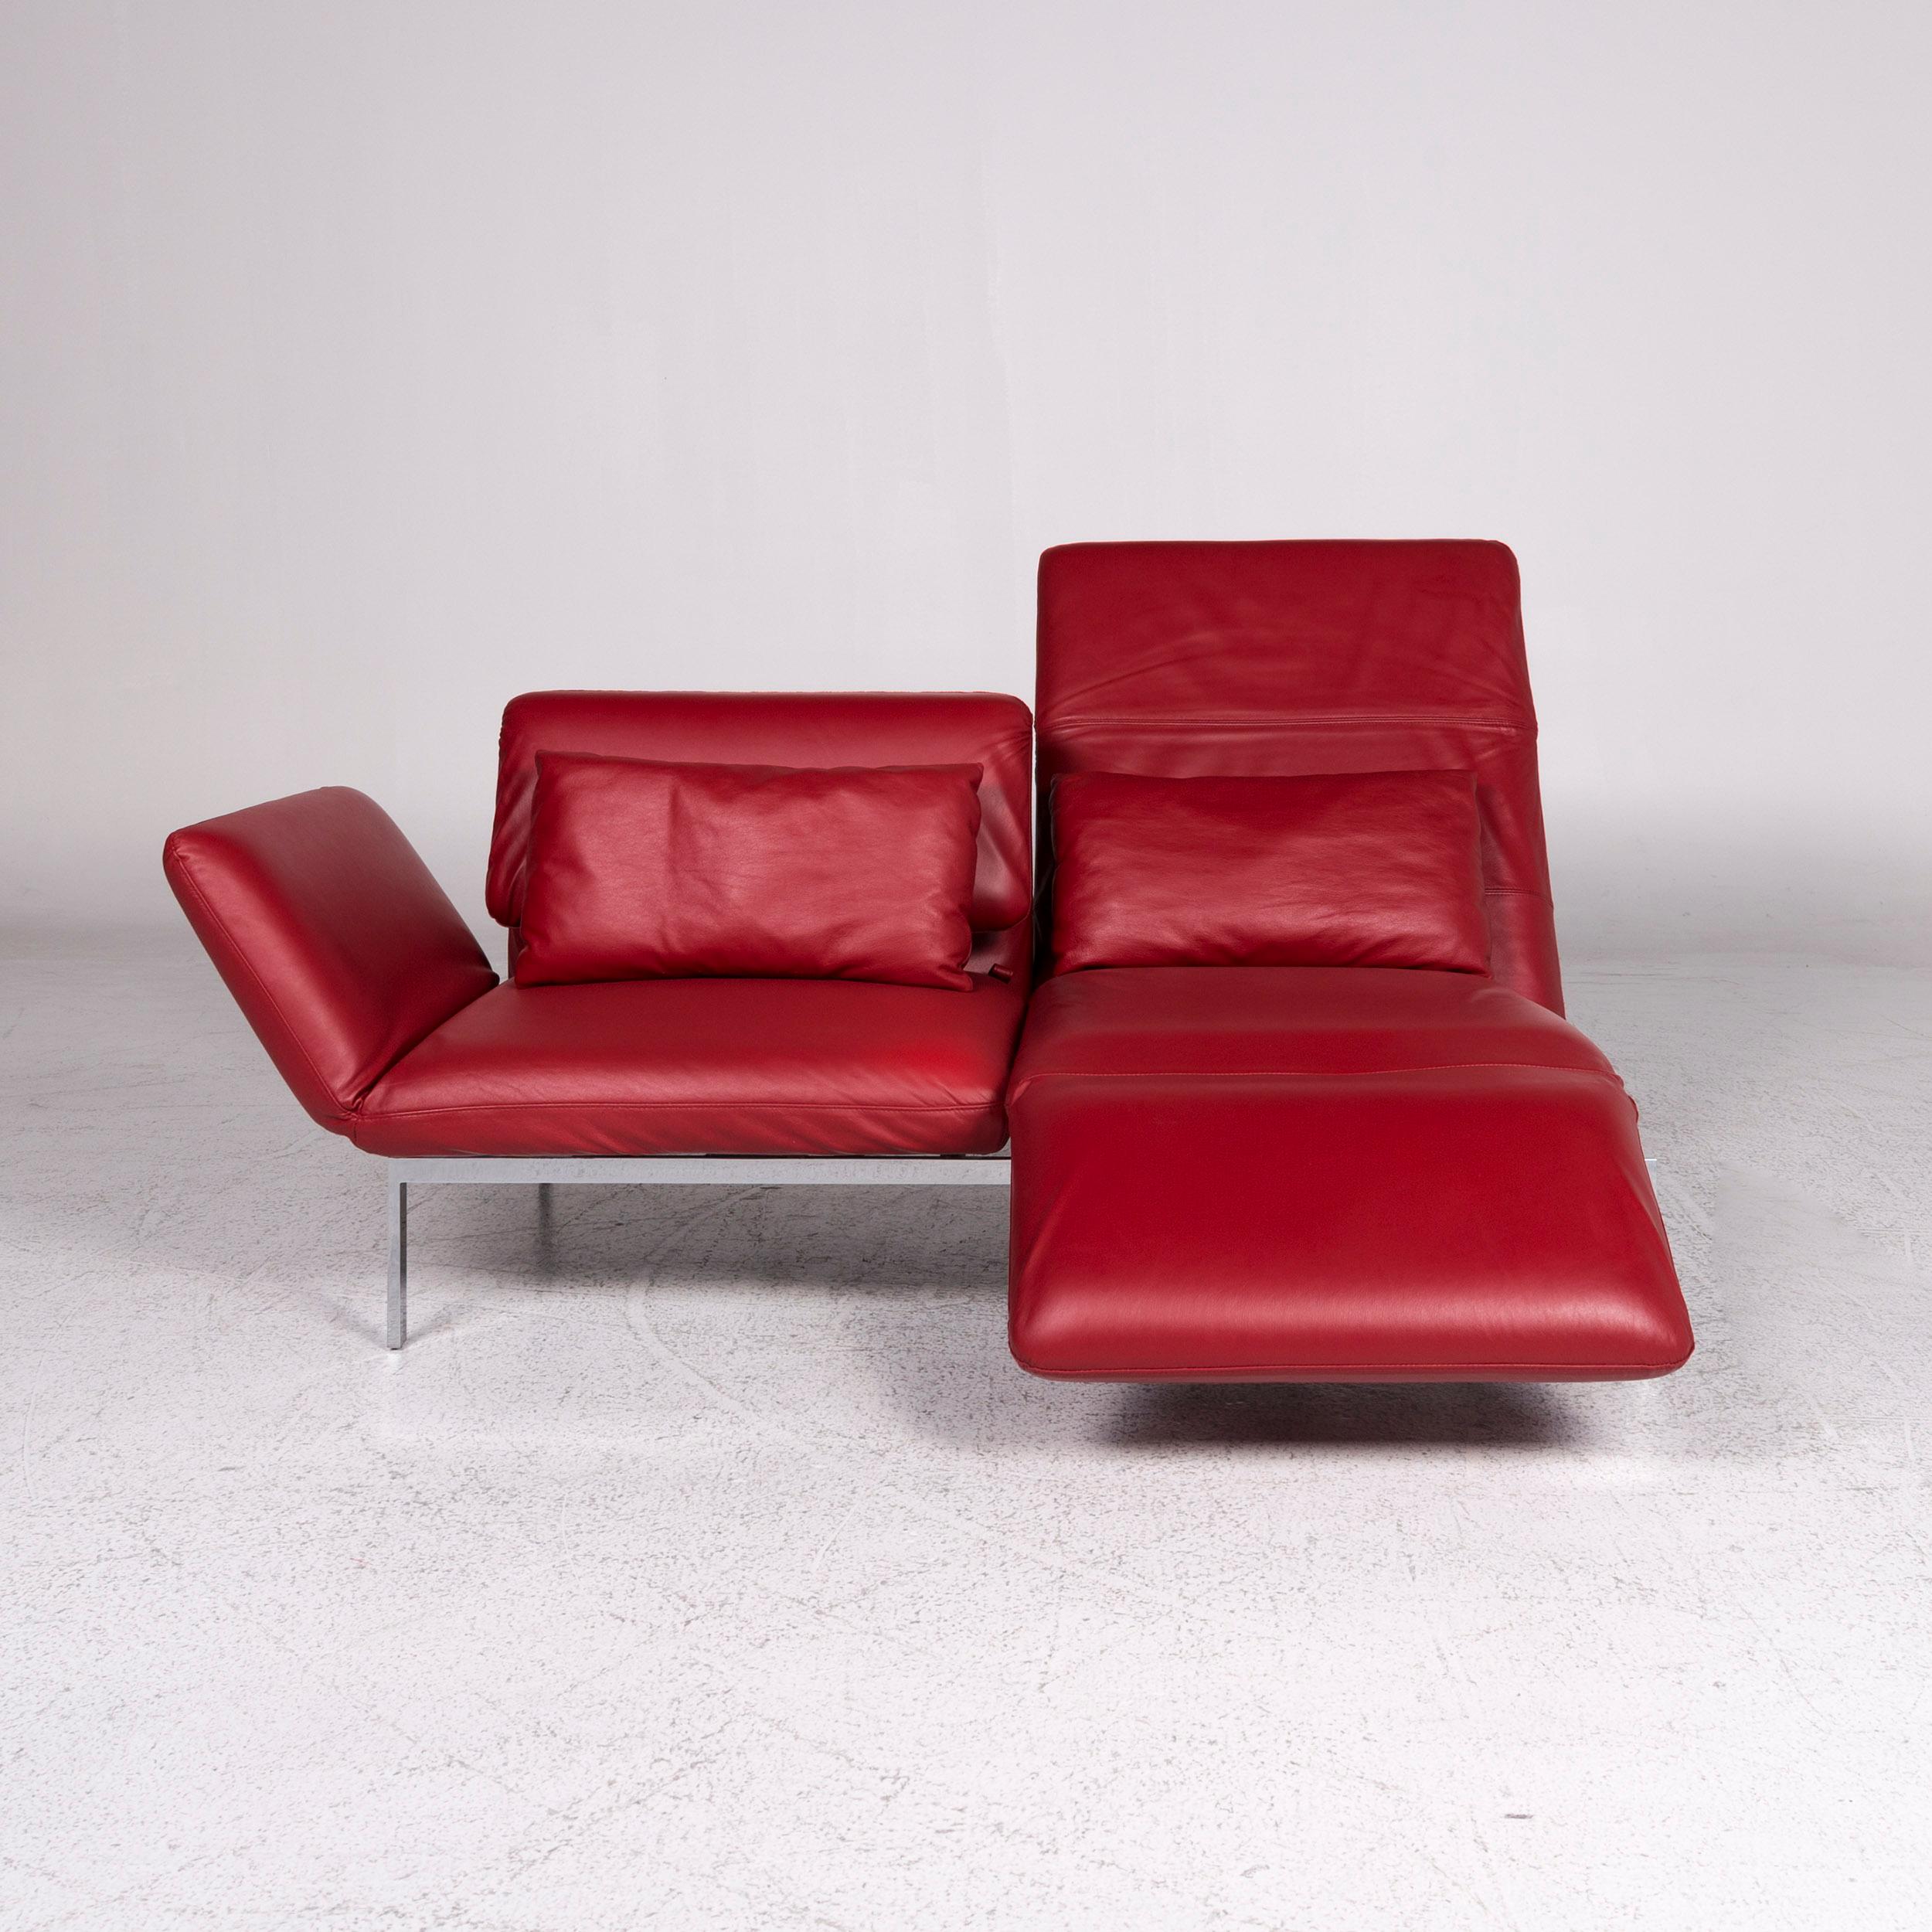 Modern Brühl & Sippold Roro Designer Leather Sofa Red Two-Seat Relax Function Couch